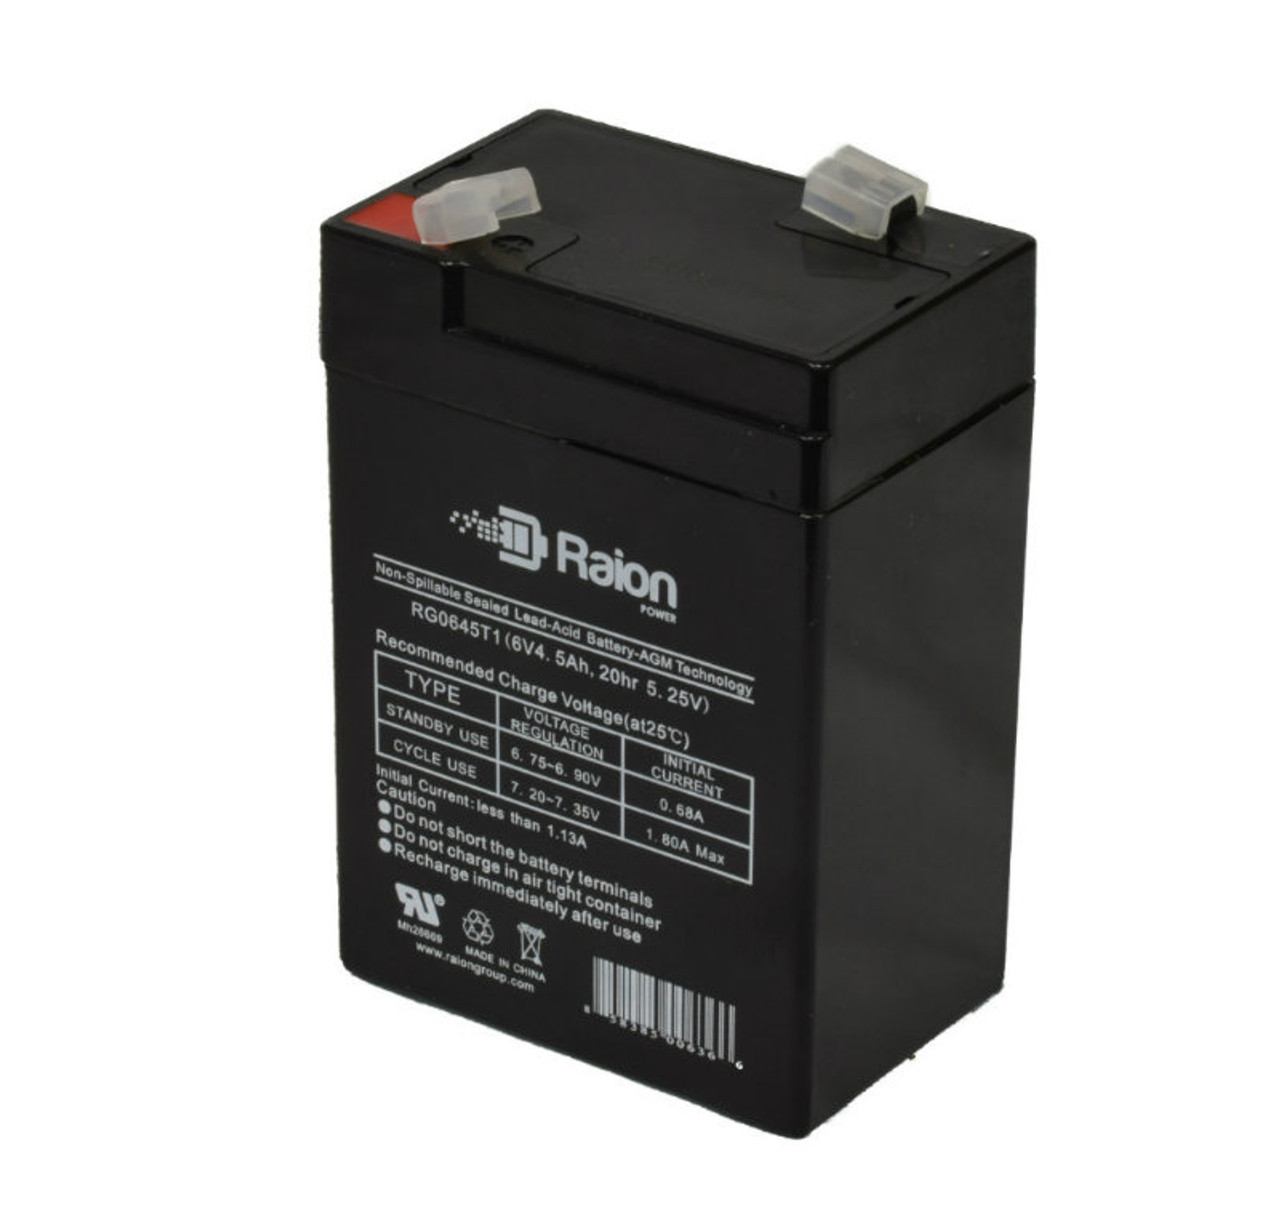 Raion Power RG0645T1 6V 4.5Ah Replacement Battery Cartridge for Higdon Decoys Floating Flasher 2